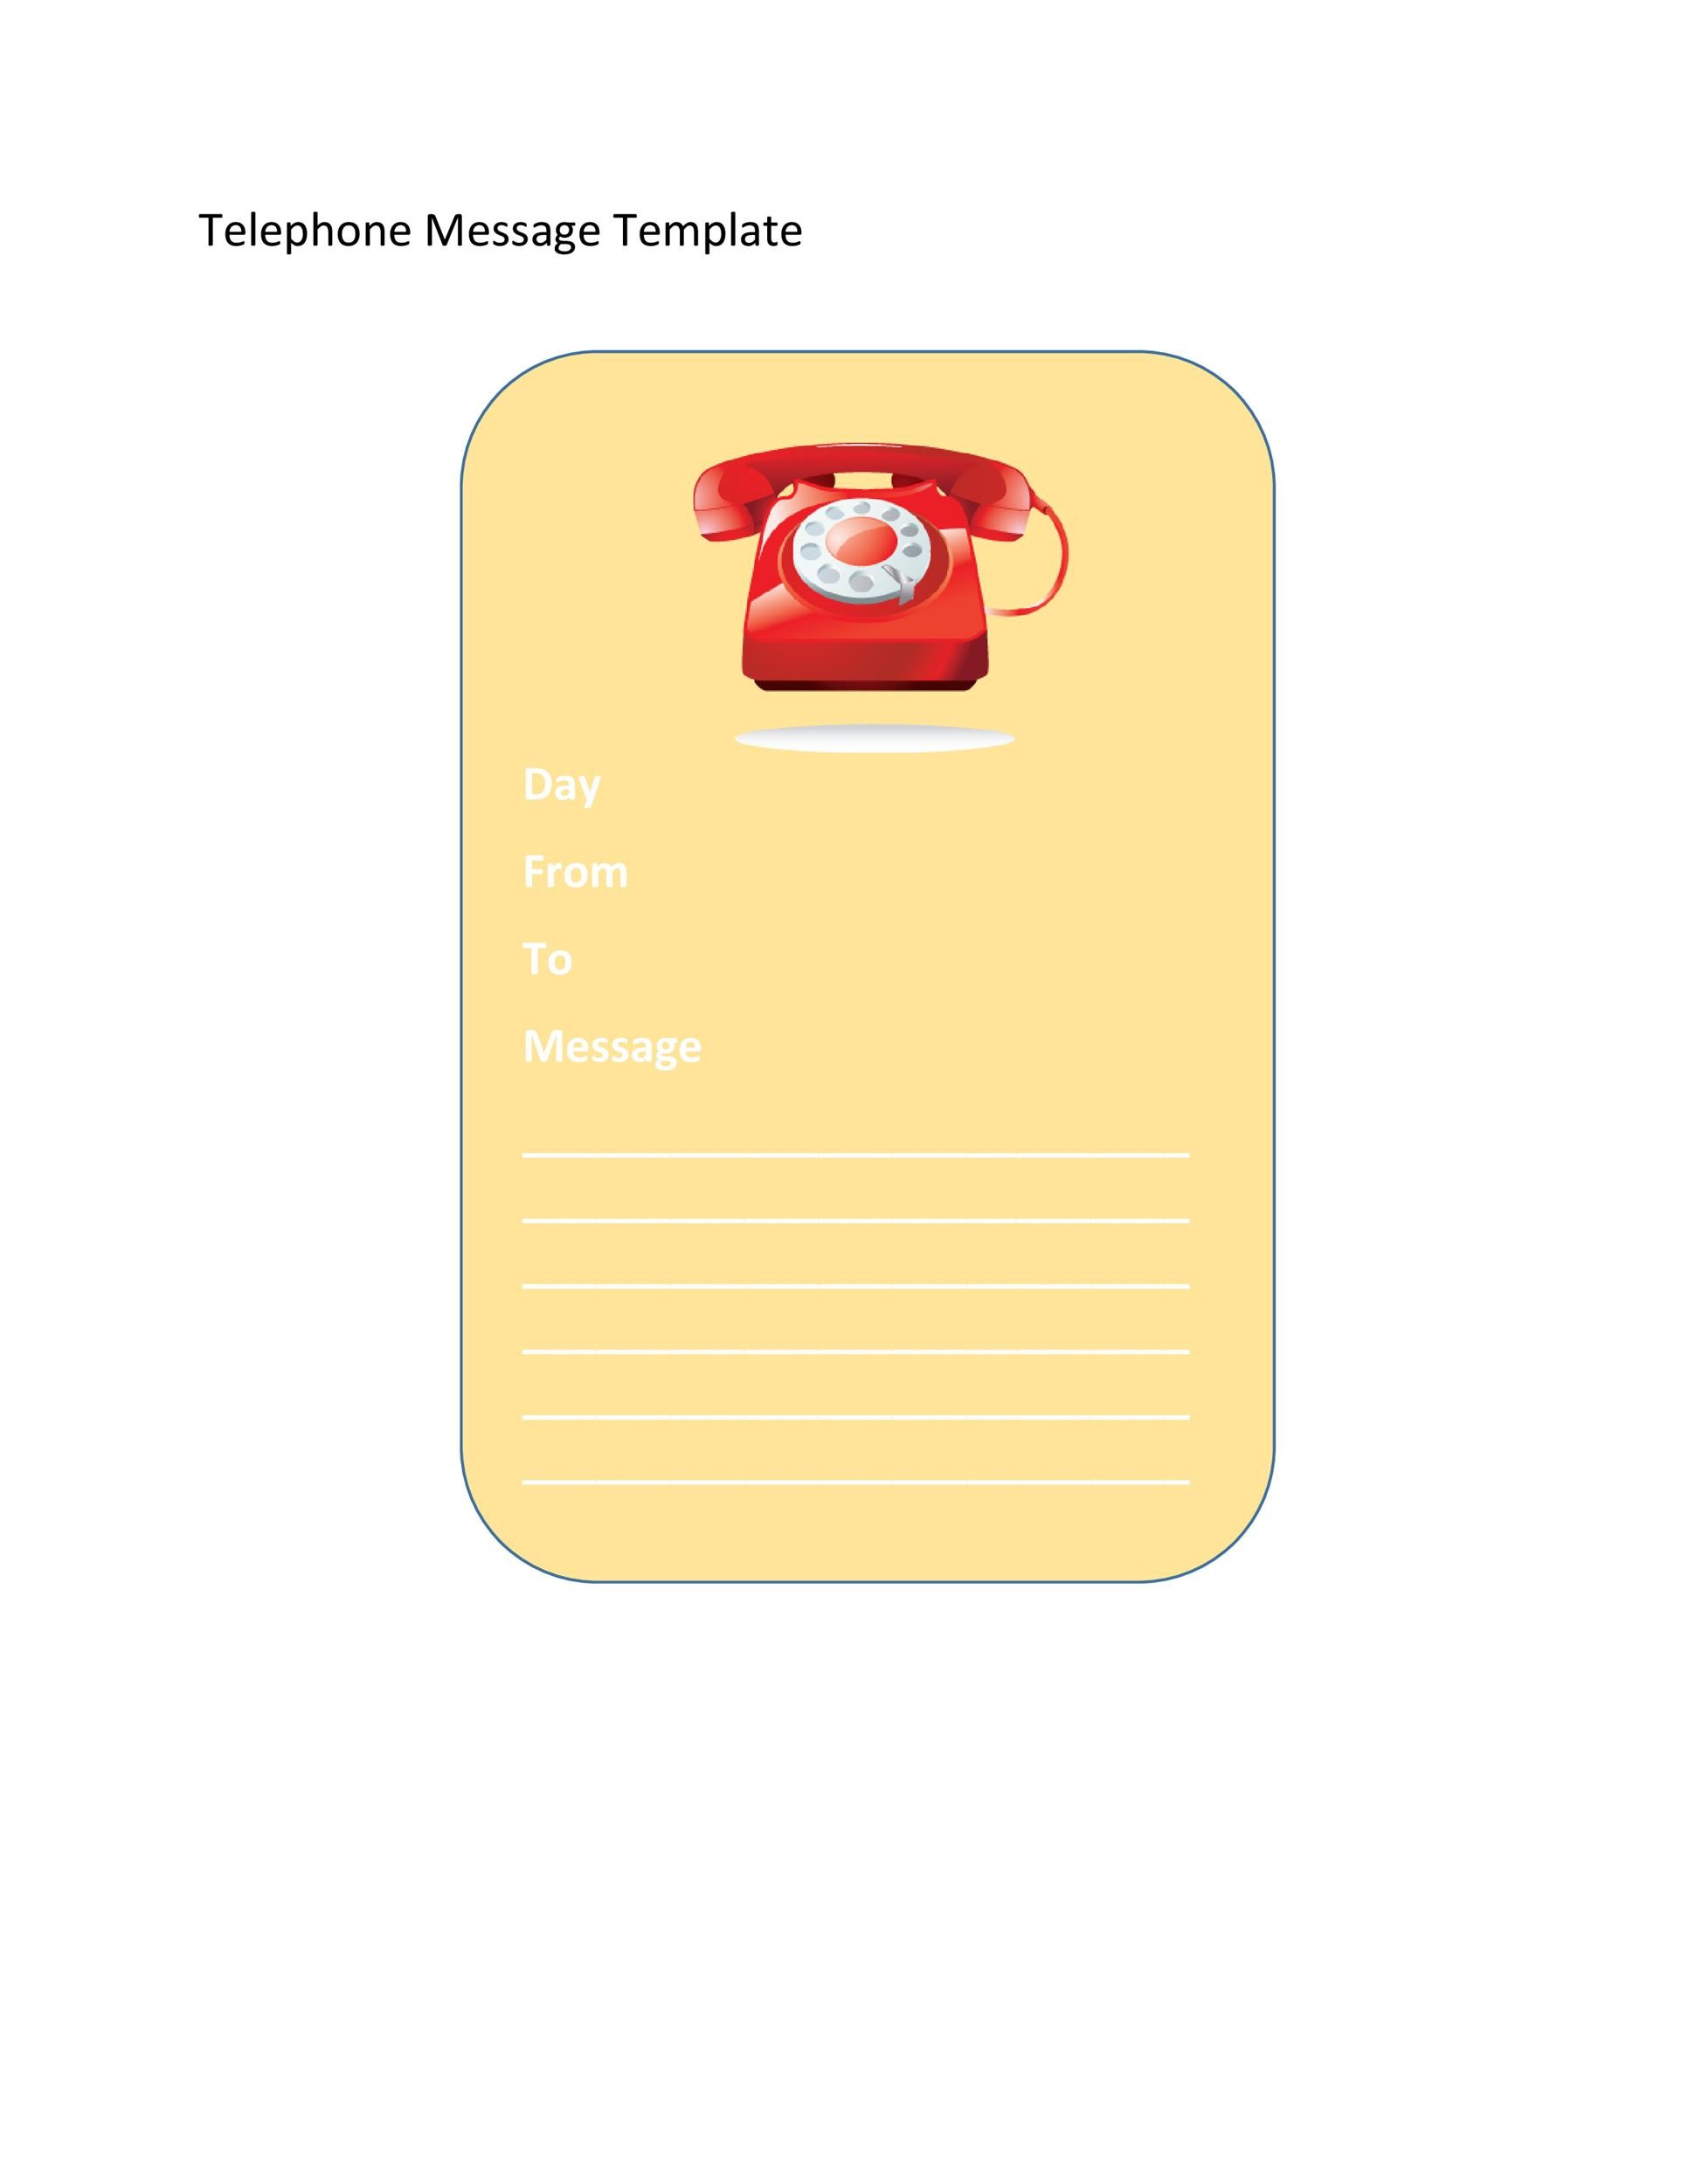 Free phone message template 30